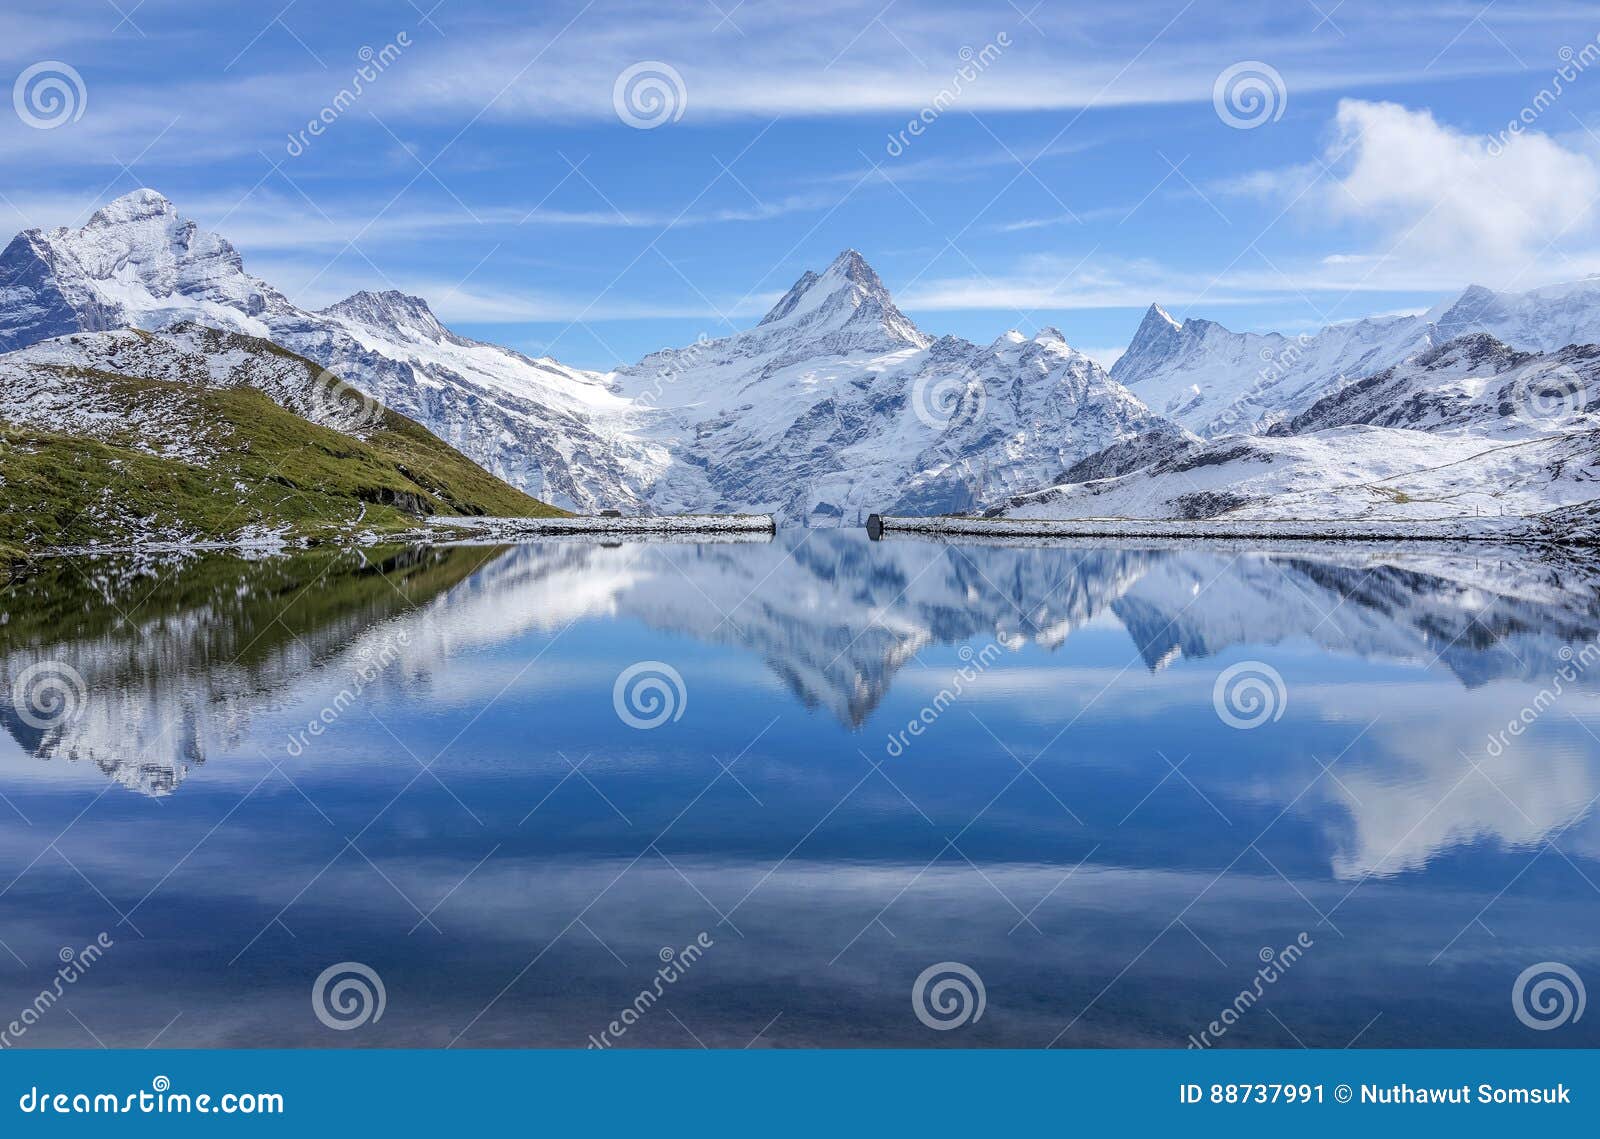 the snow mountain with reflection in lake and clear blue sky in switzerland